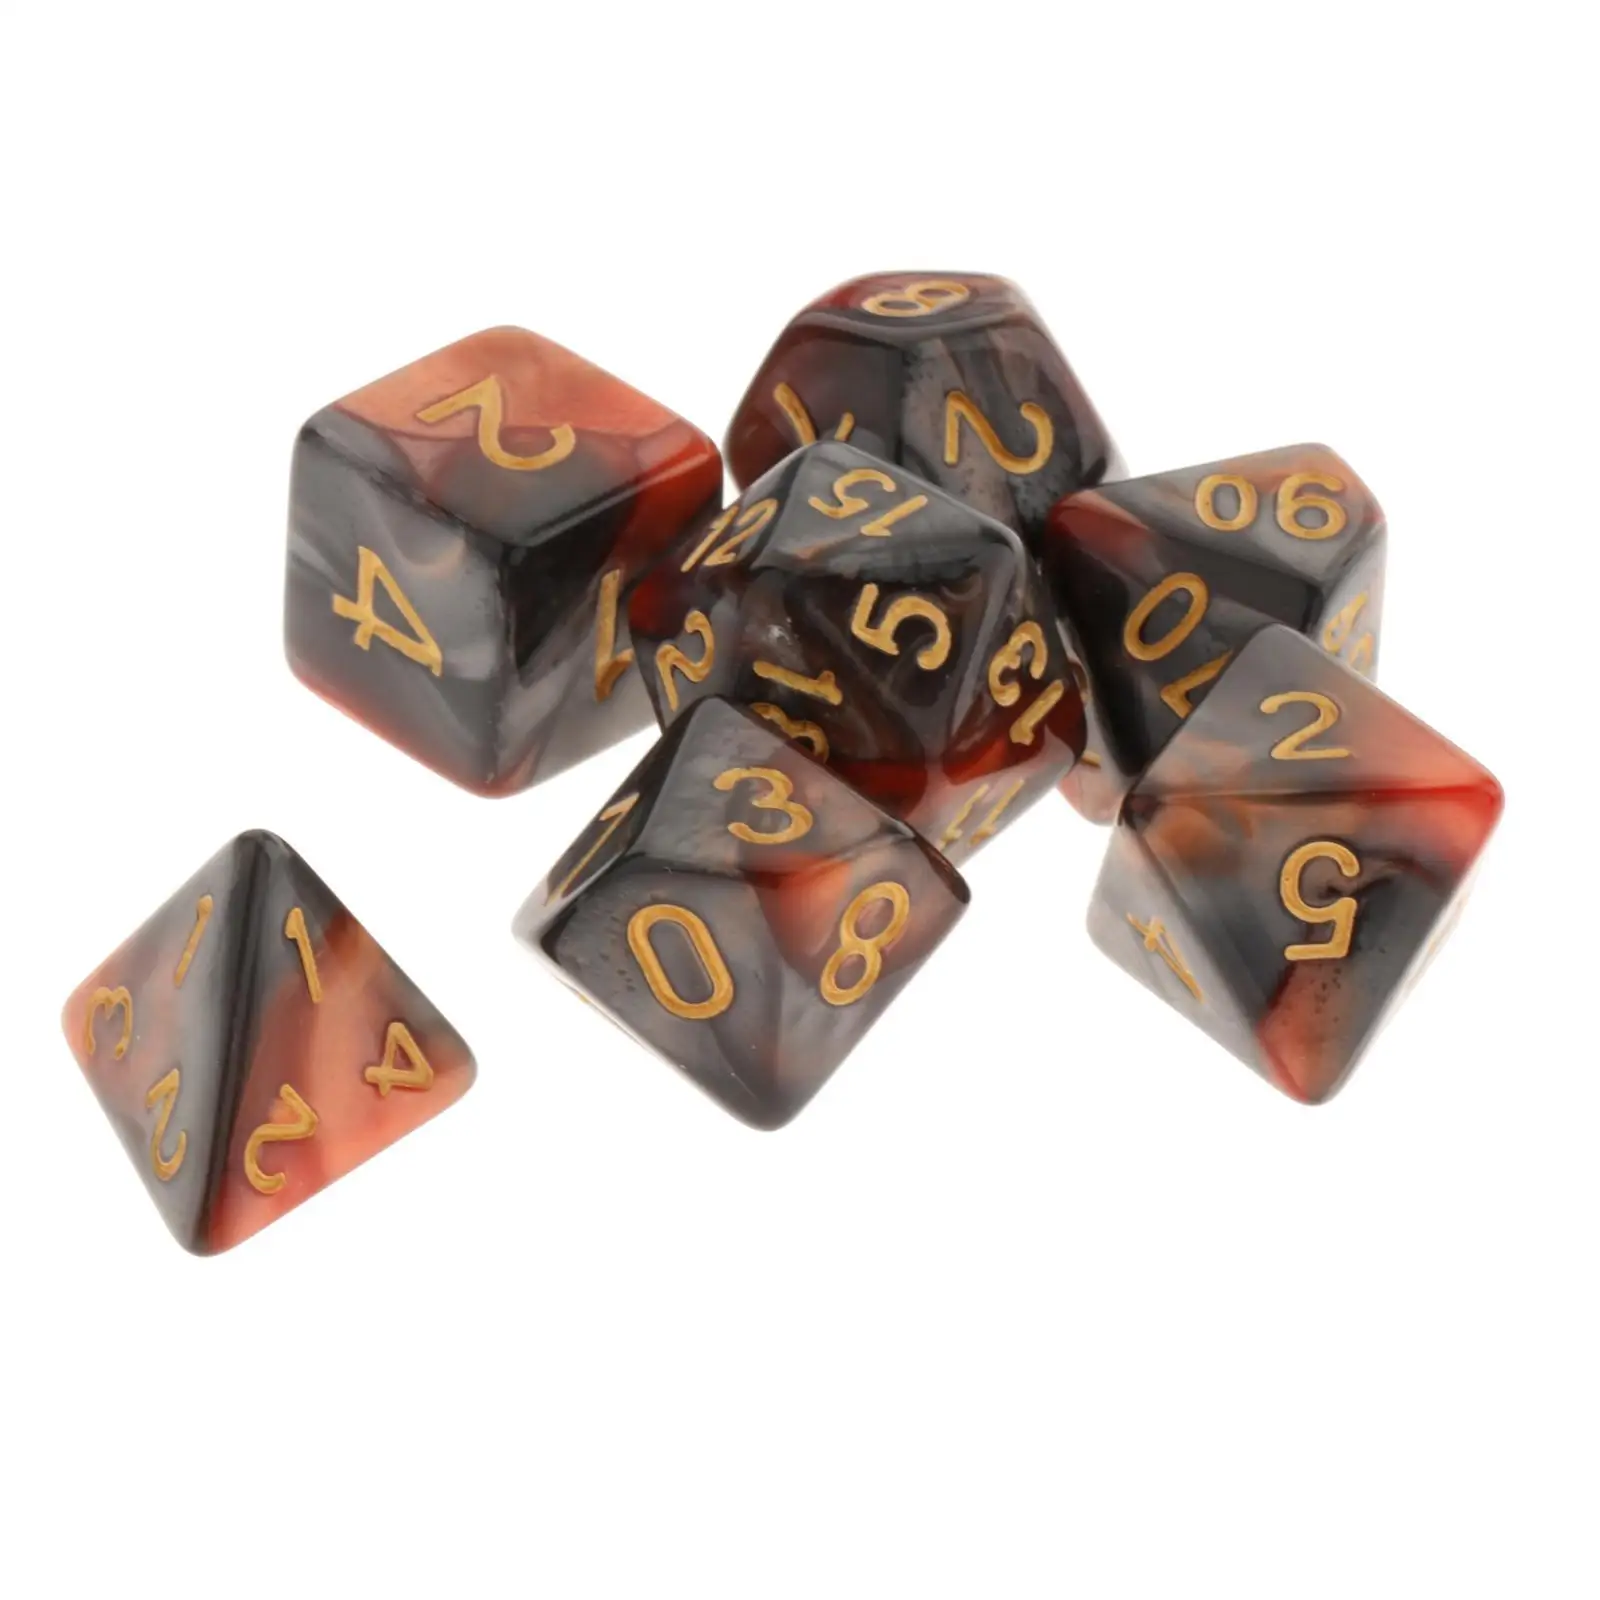 7x Polyhedral Dice D4-D20 for Dungeons & Dragons Party Role Play Red & Black 